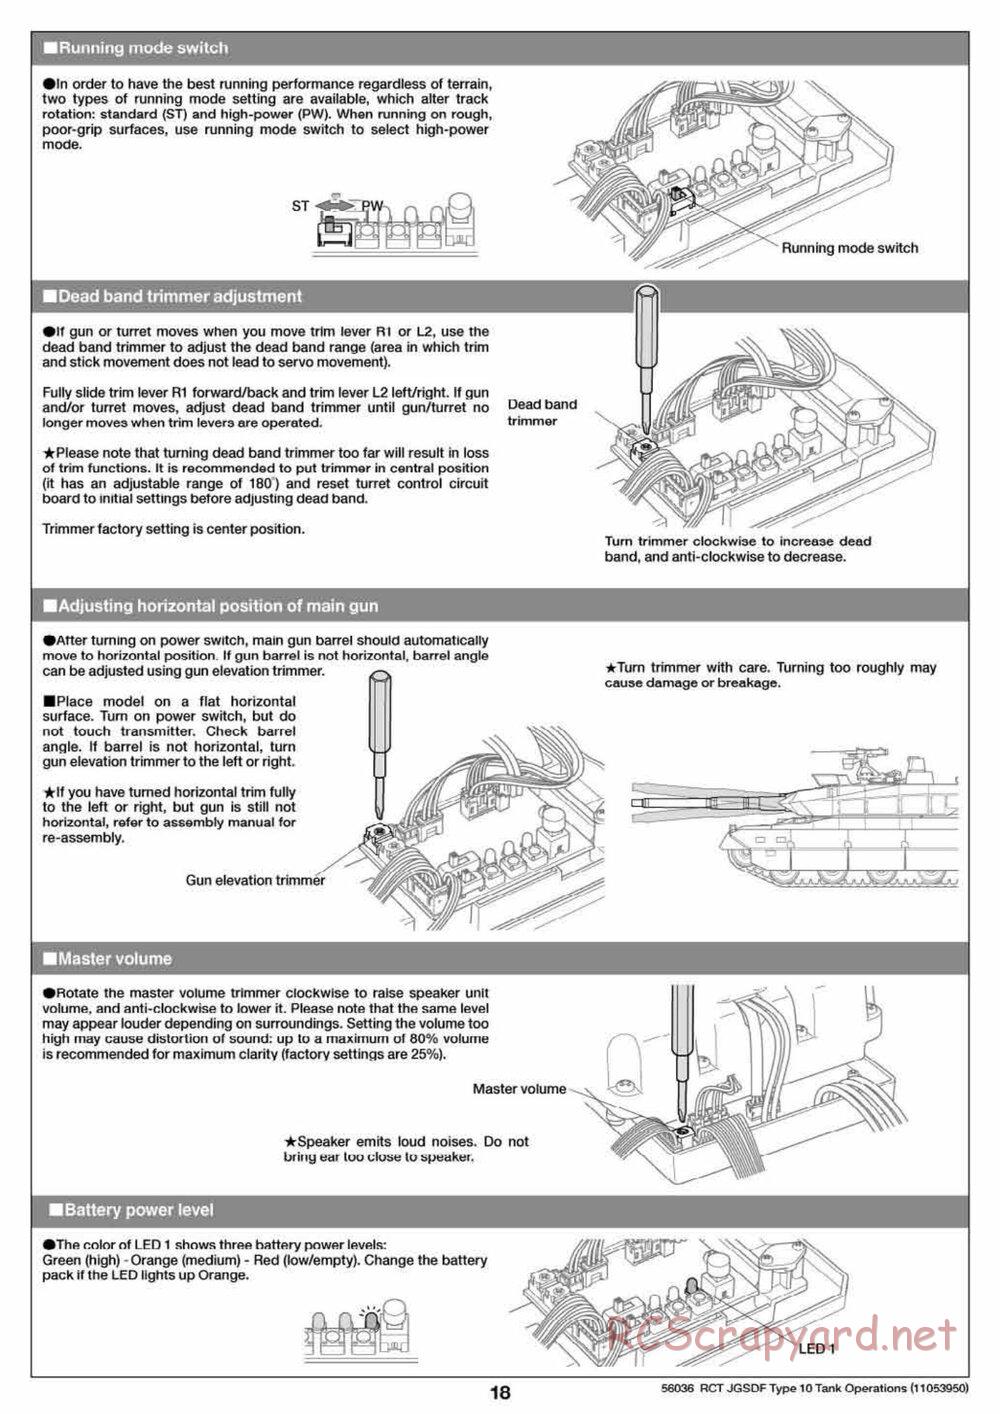 Tamiya - JGSDF Type 10 Tank - 1/16 Scale Chassis - Operation Manual - Page 8